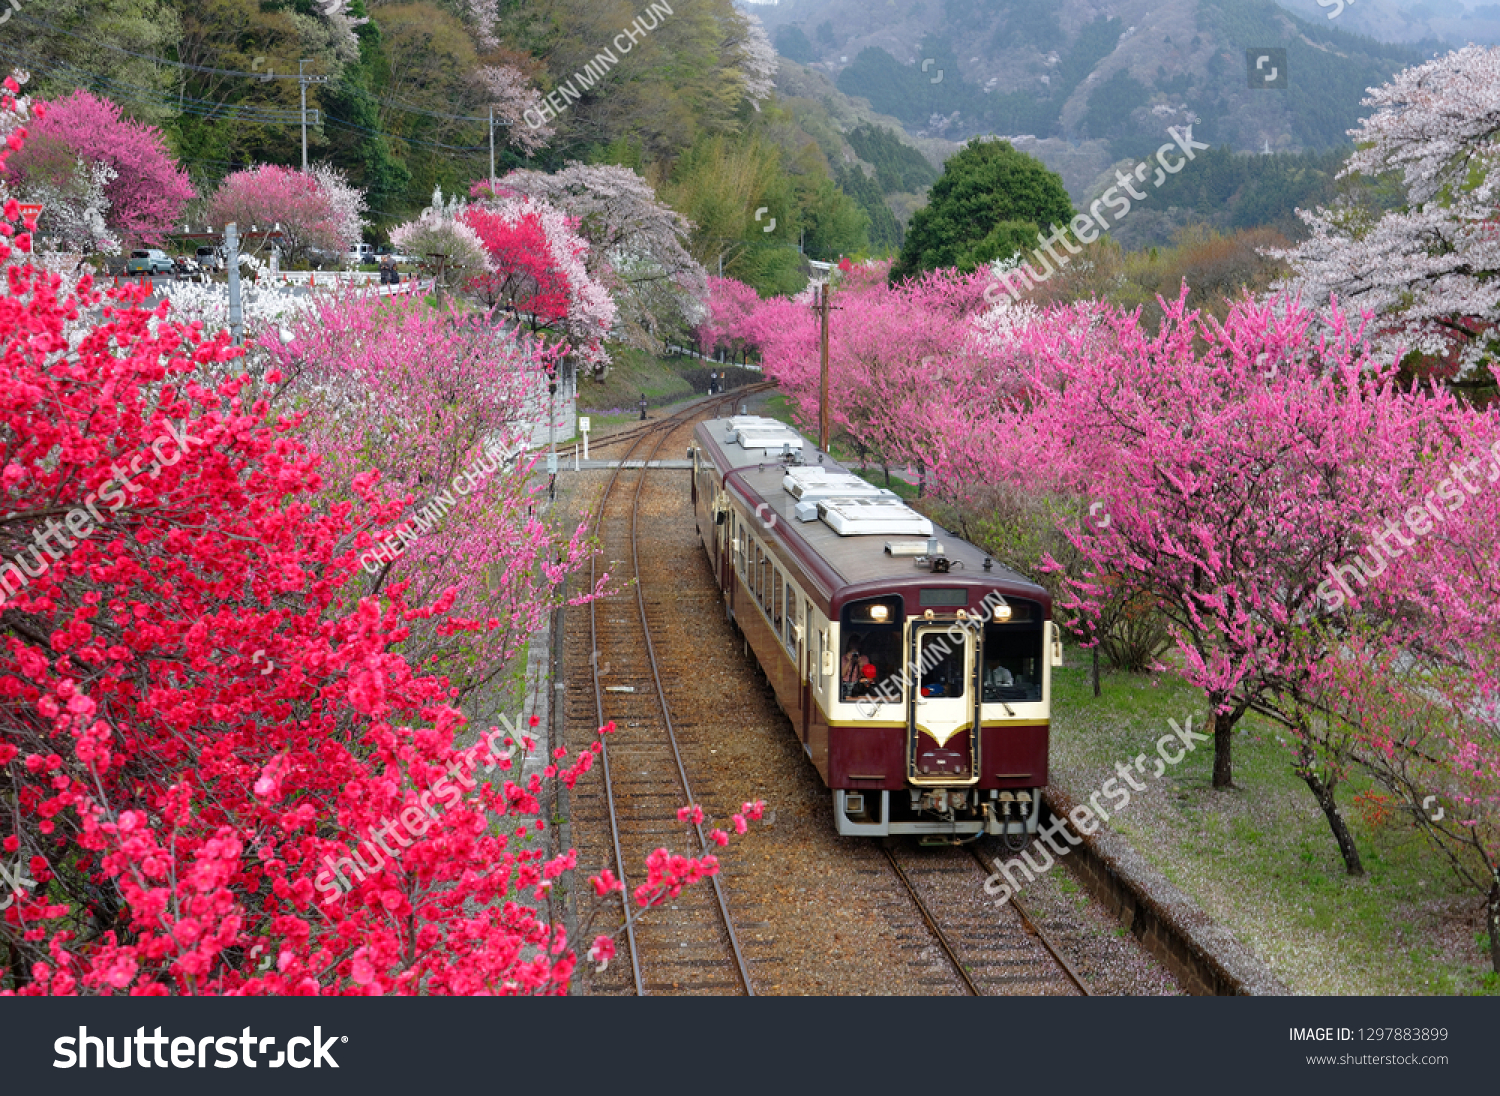 Retro cars of a local train arriving at Godo Station of Watarase Keikoku Railway Line (渡良瀬渓谷鉄道), with pink and red blossom trees blooming vibrantly along the railroad tracks, in Midori, Gunma, Japan #1297883899